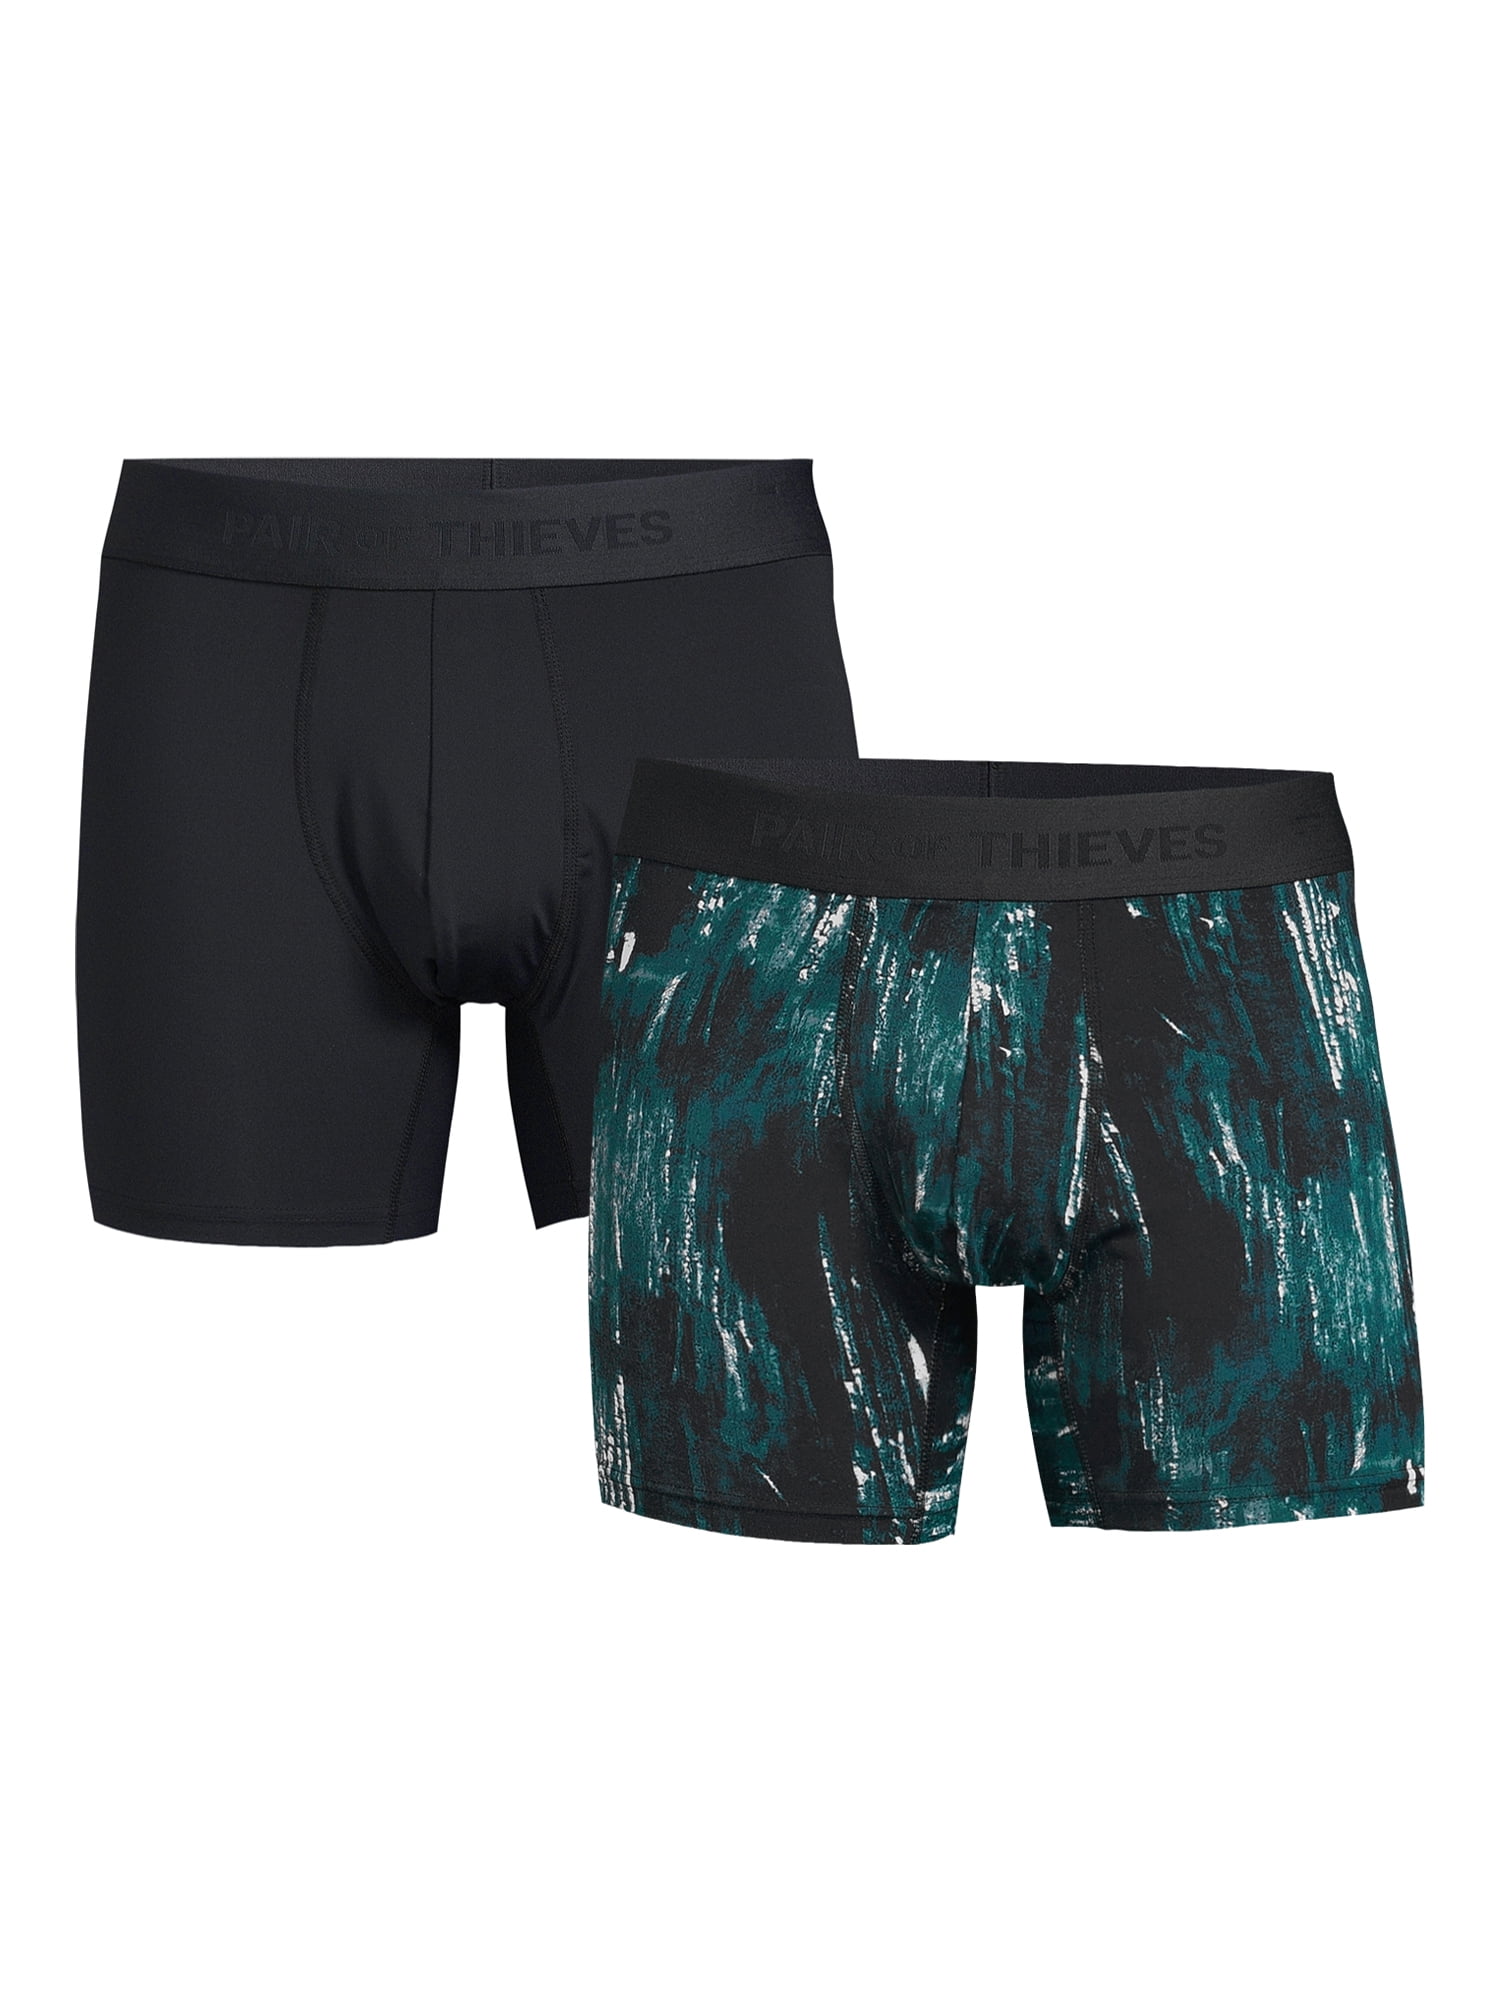 Pair of Thieves Hustle Boxer Briefs, 2-Pack, Cords 